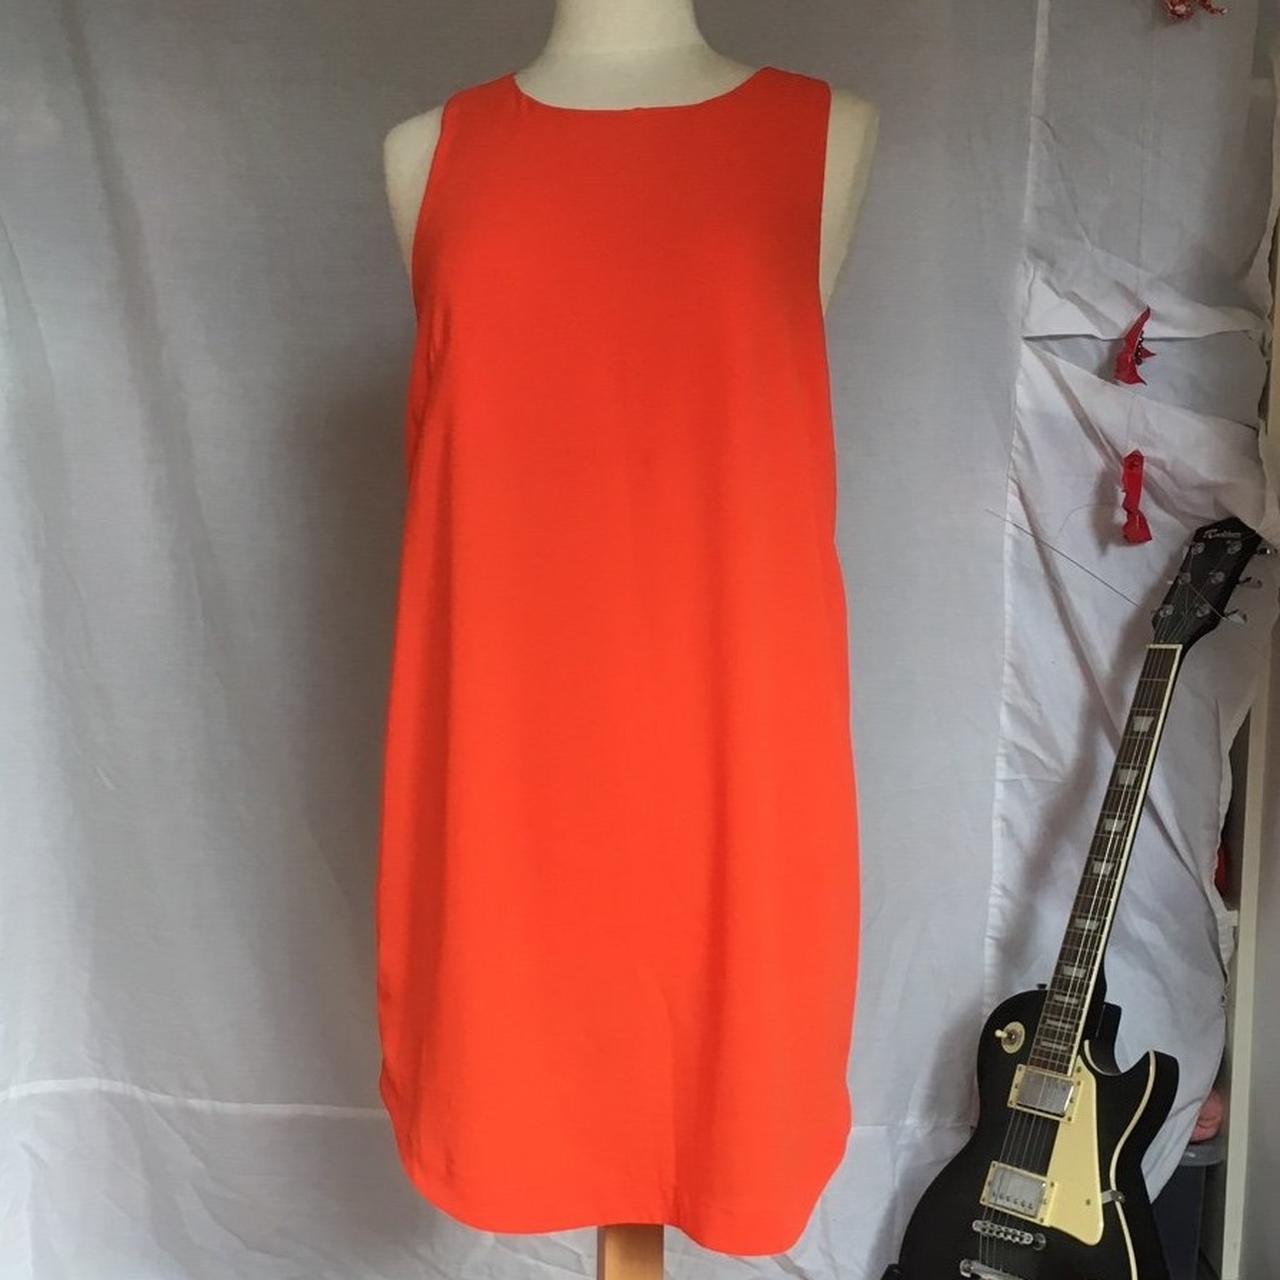 H&M dress top. Wore once and in good condition. Says... - Depop